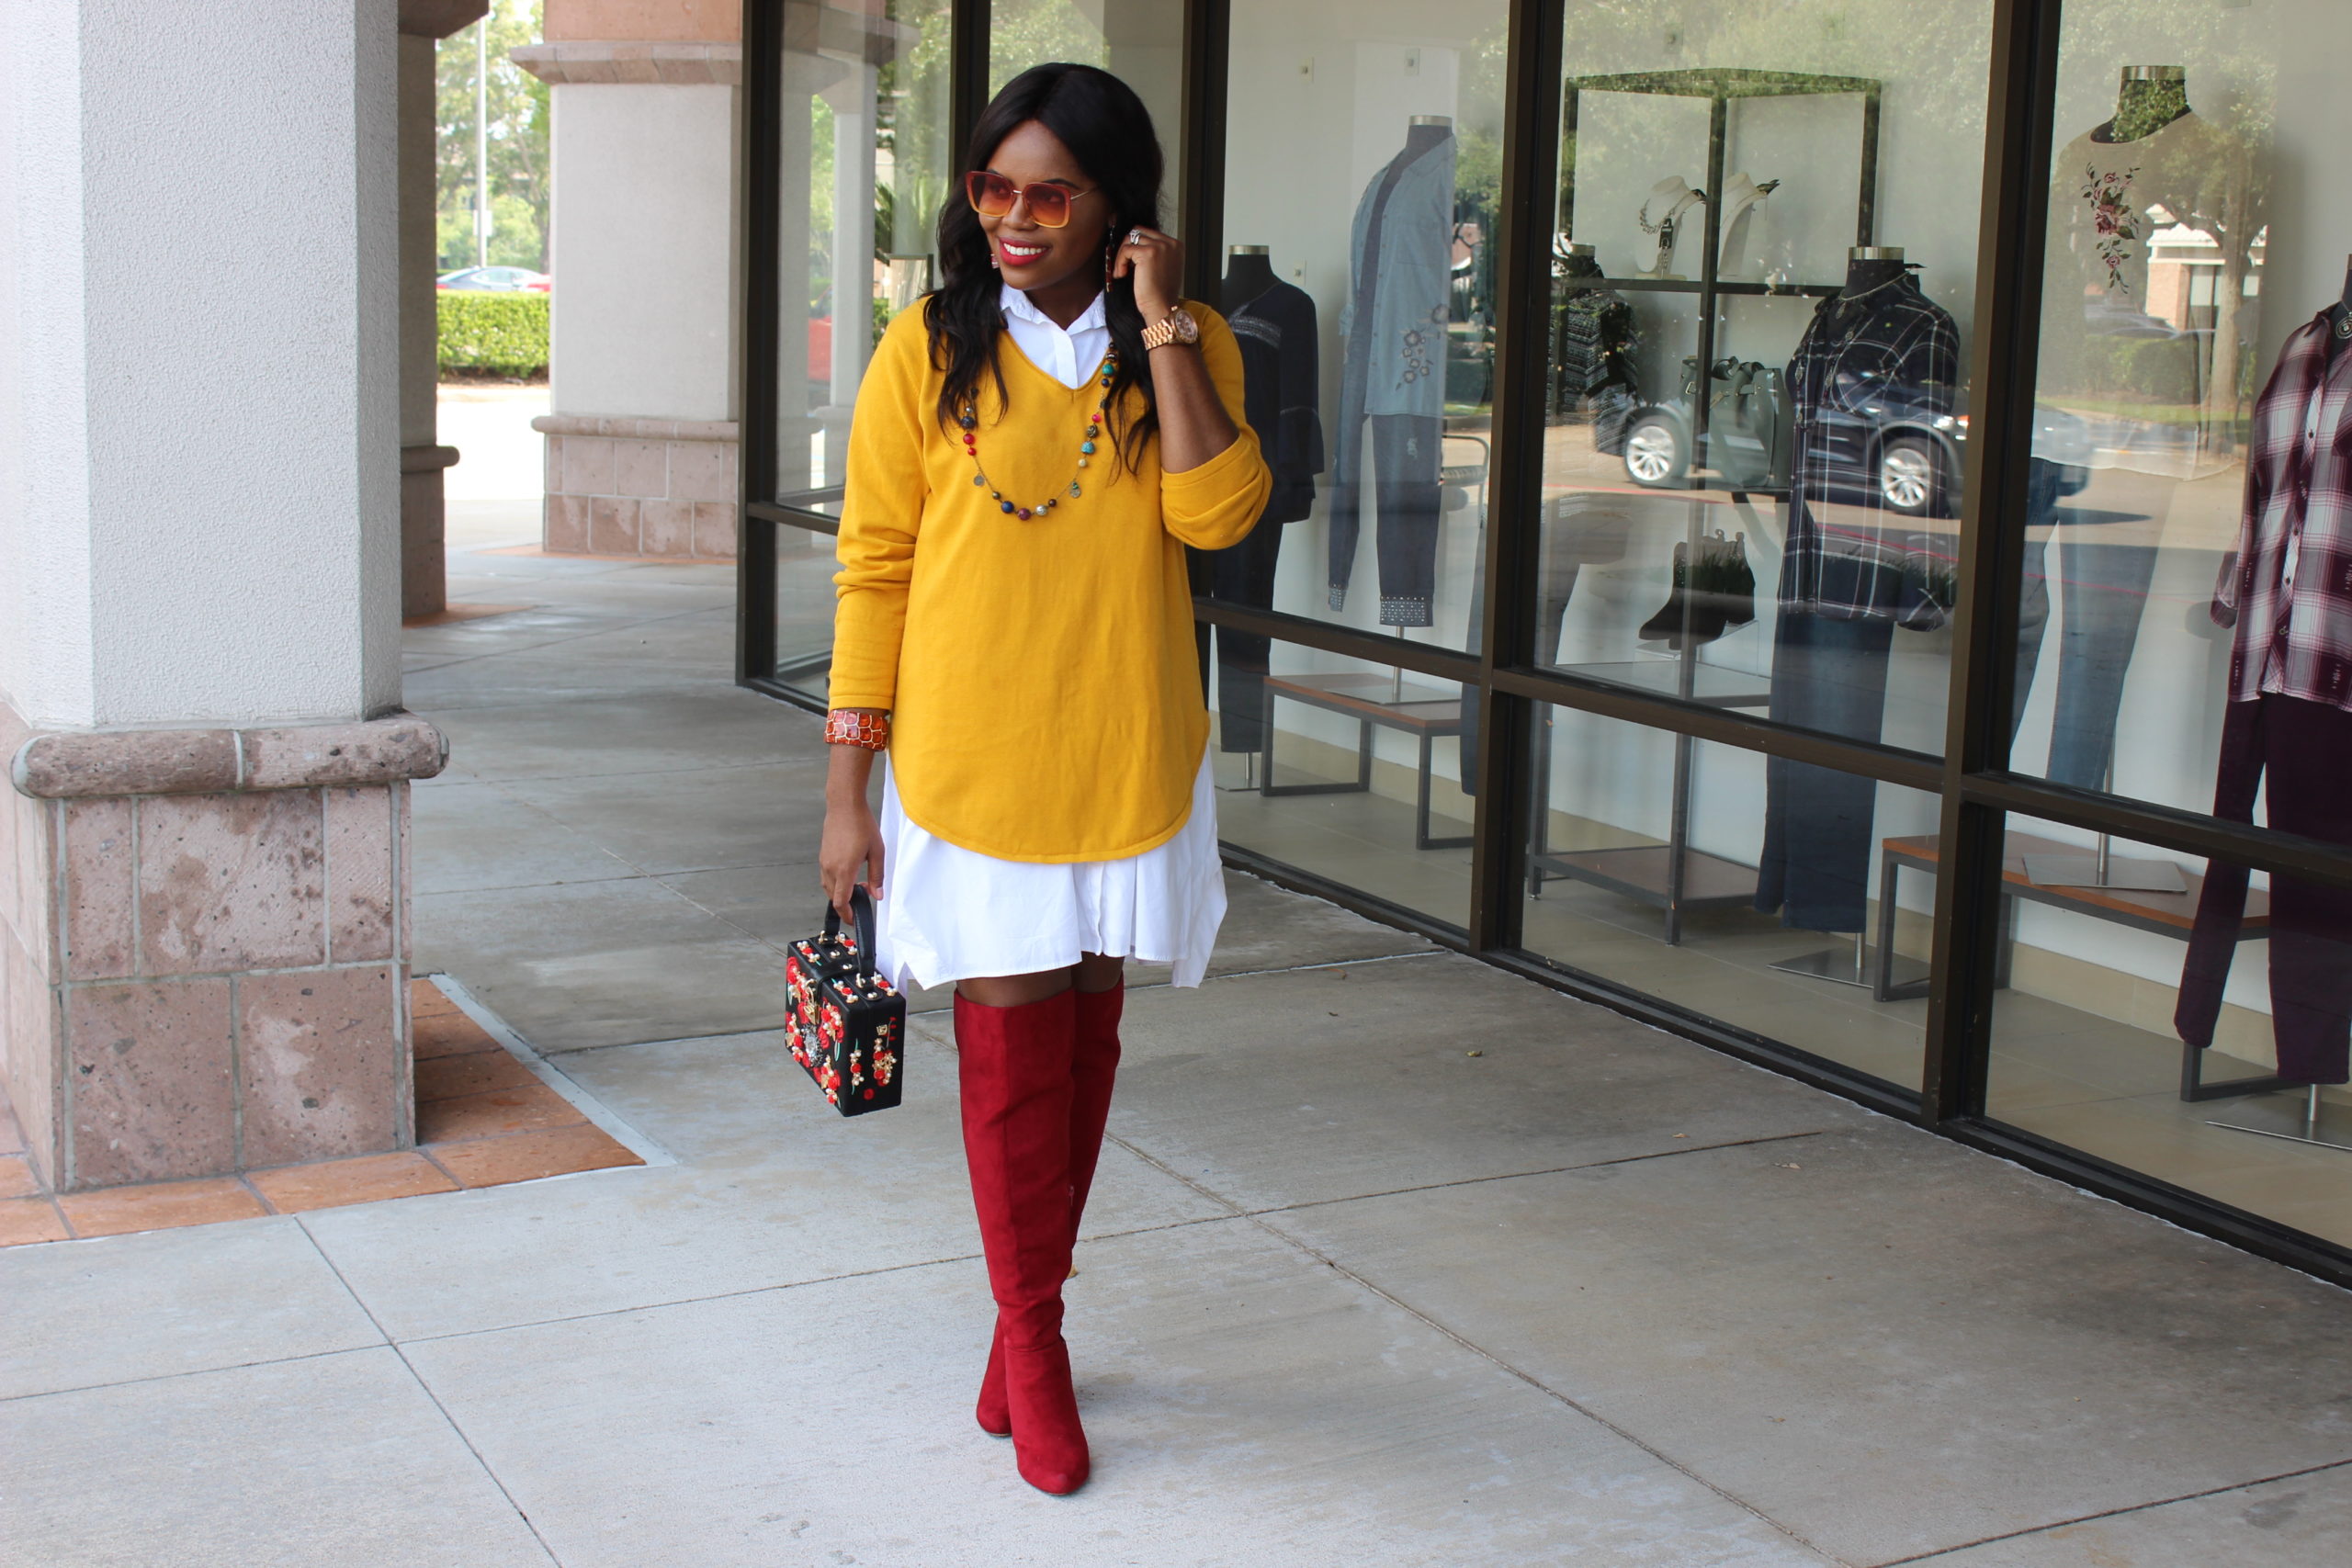 How To Get A Fresh Start in Life Alfani White Shirt Dress Macy's Yellow Knit Sweater Red Over the Knee Shoedazzle Boots Retro 3D Red Floral Embroidery Evening Bag Vintage Handbag Beehive Houston Boutique Sunglasses Houston Fashion Lifestyle Blogger